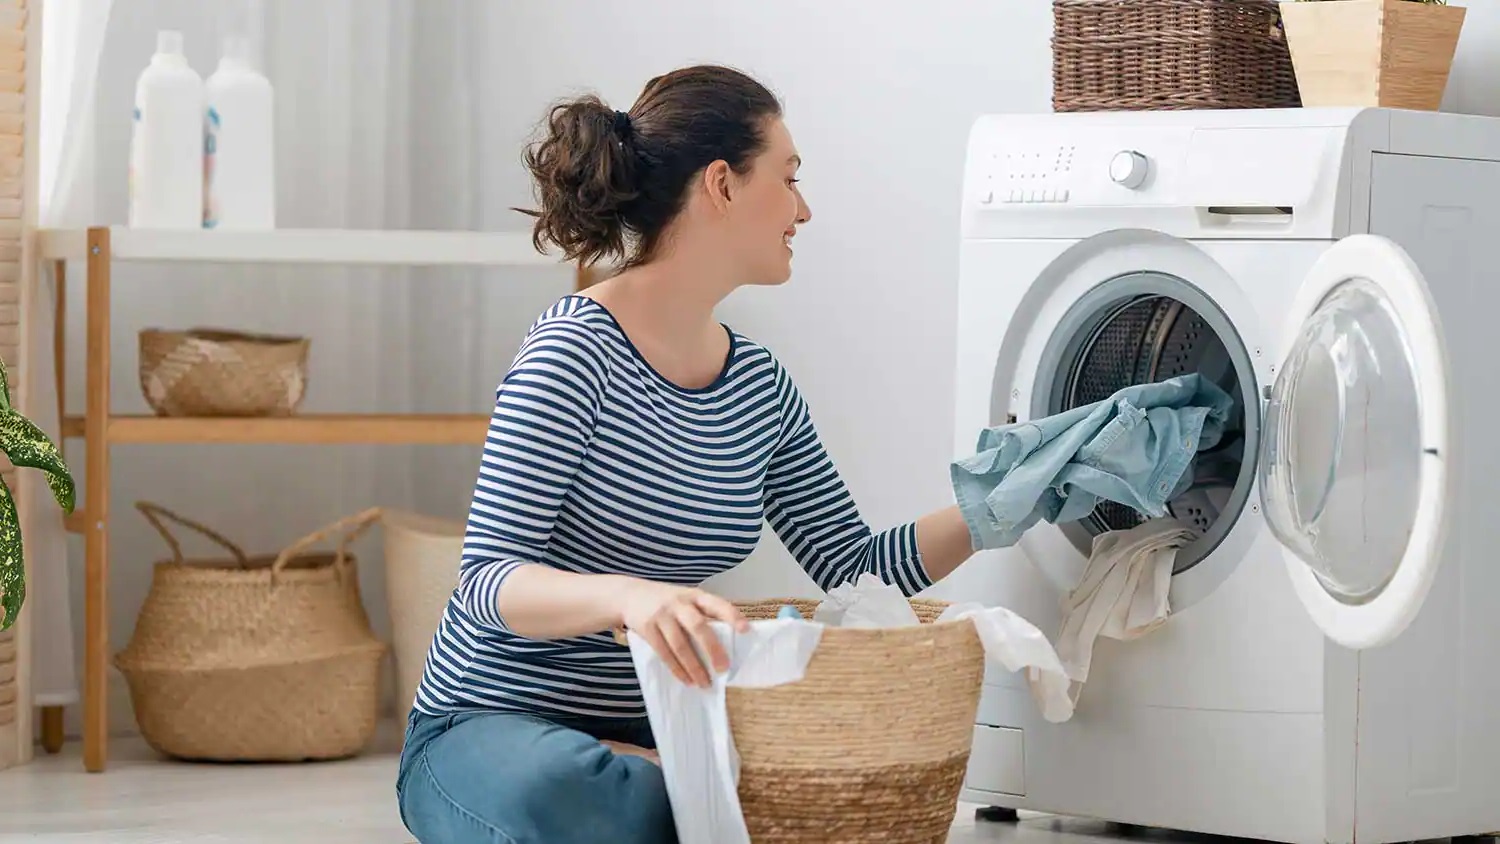 How To Unclog A Washing Machine Drain